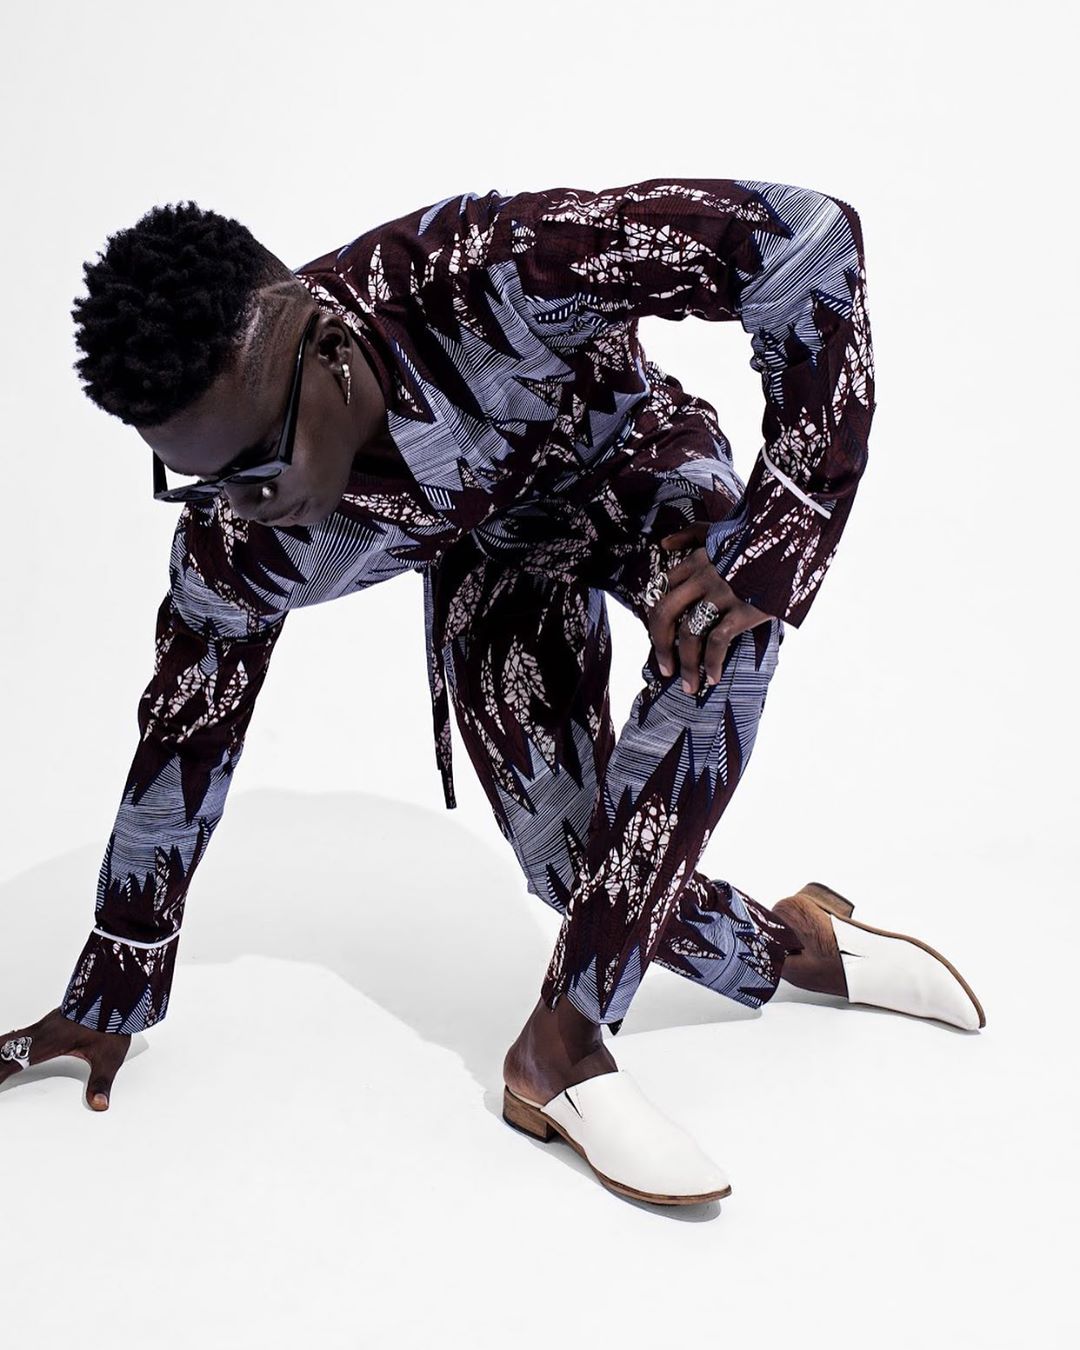 The TJWHO UNIVERSE CRUISE 2020 Collection Is A Study in Modern African Menswear